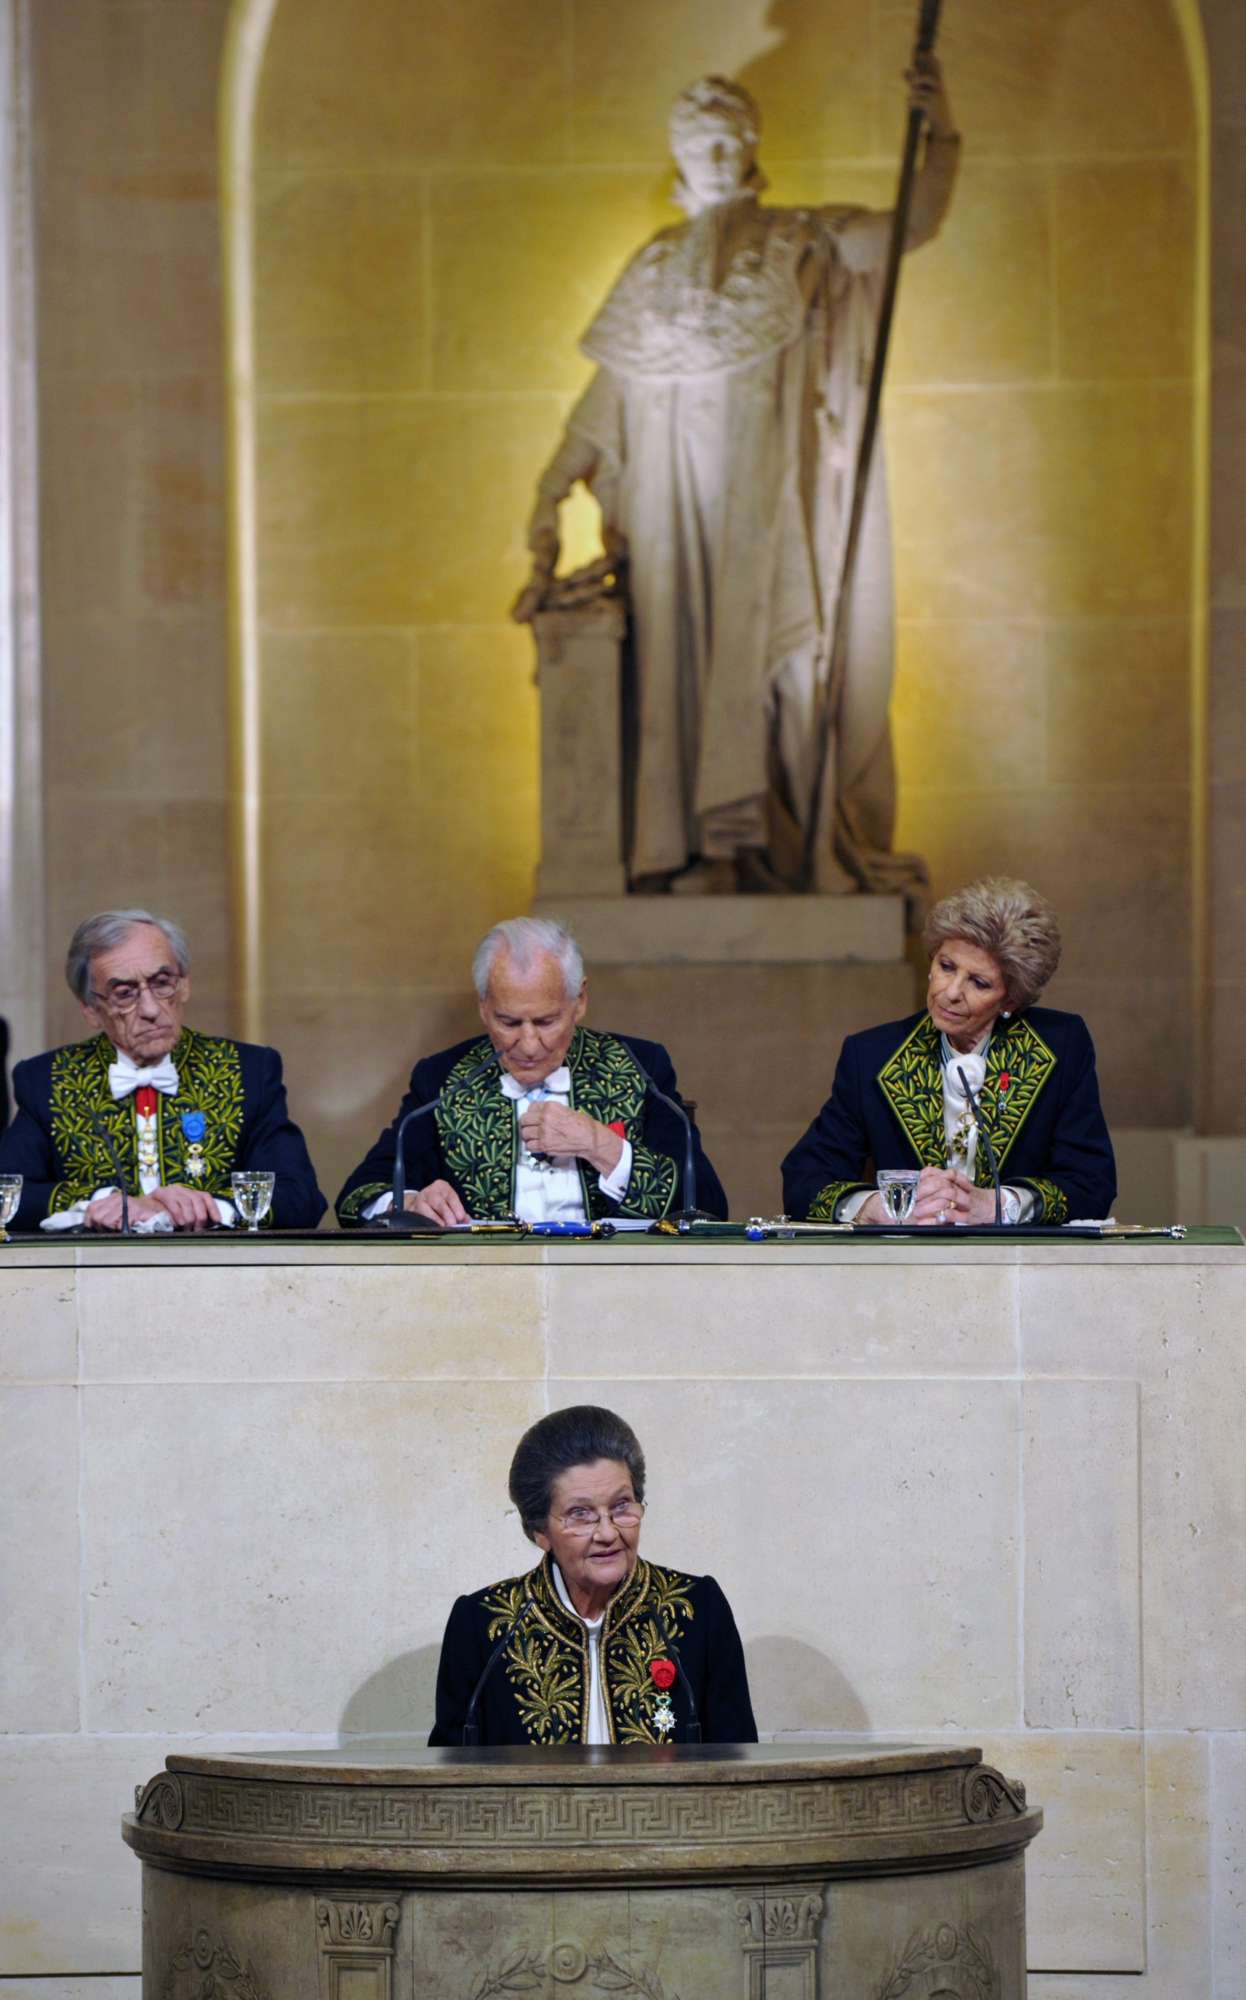 epa02084514 French politician Simone Veil (C), dressed in the French Academician's uniform of a black jacket embroidered in green laurel leaves, delivers a speech during a ceremony at the Institut de France in Paris, France, 18 March 2010. Seen top, Jean d'Ormesson (C), Dean of the French Academy, and Academician Helene Carrere d'Encausse (R). Feminist, former minister and Auschwitz survivor Simone Veil became 18 March the sixth woman to enter the prestigious
Academie Francaise in its 375-year history, thus becoming what the French call an "Immortel". The 82-year-old Veil is France's most popular woman, renowned above all for her courageous battle to legalize abortion in 1975, when she was minister of health.  EPA/PHILIPPE WOJAZER/POOL MAXPPP OUT FRANKREICH SIMONE VEIL AUSZEICHNUNG